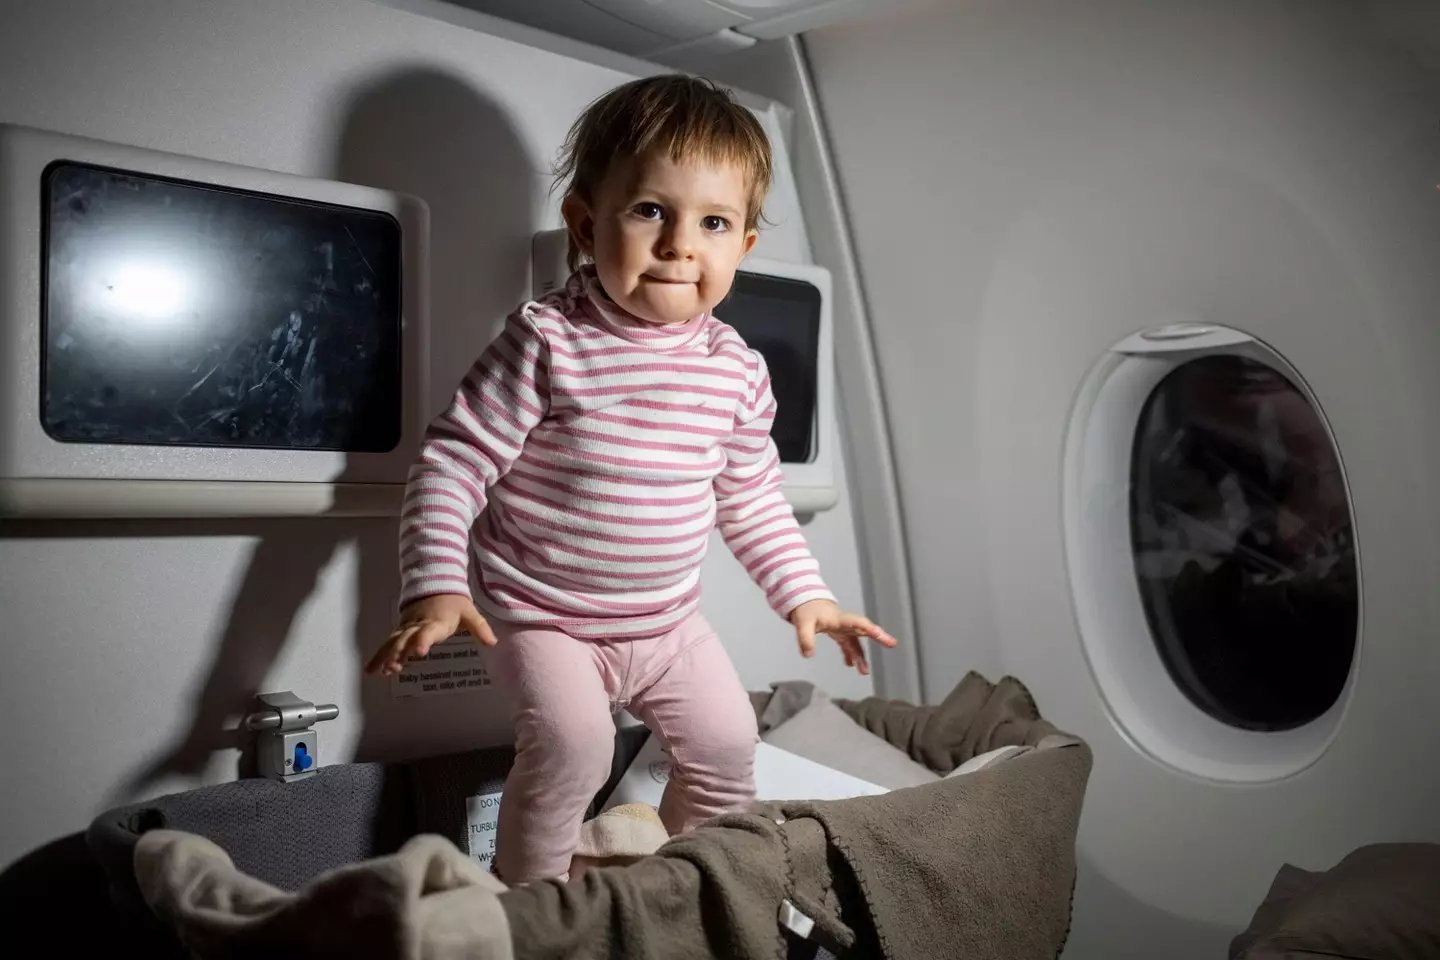 No one wants to sit next to a baby on a plane though, let's be real.